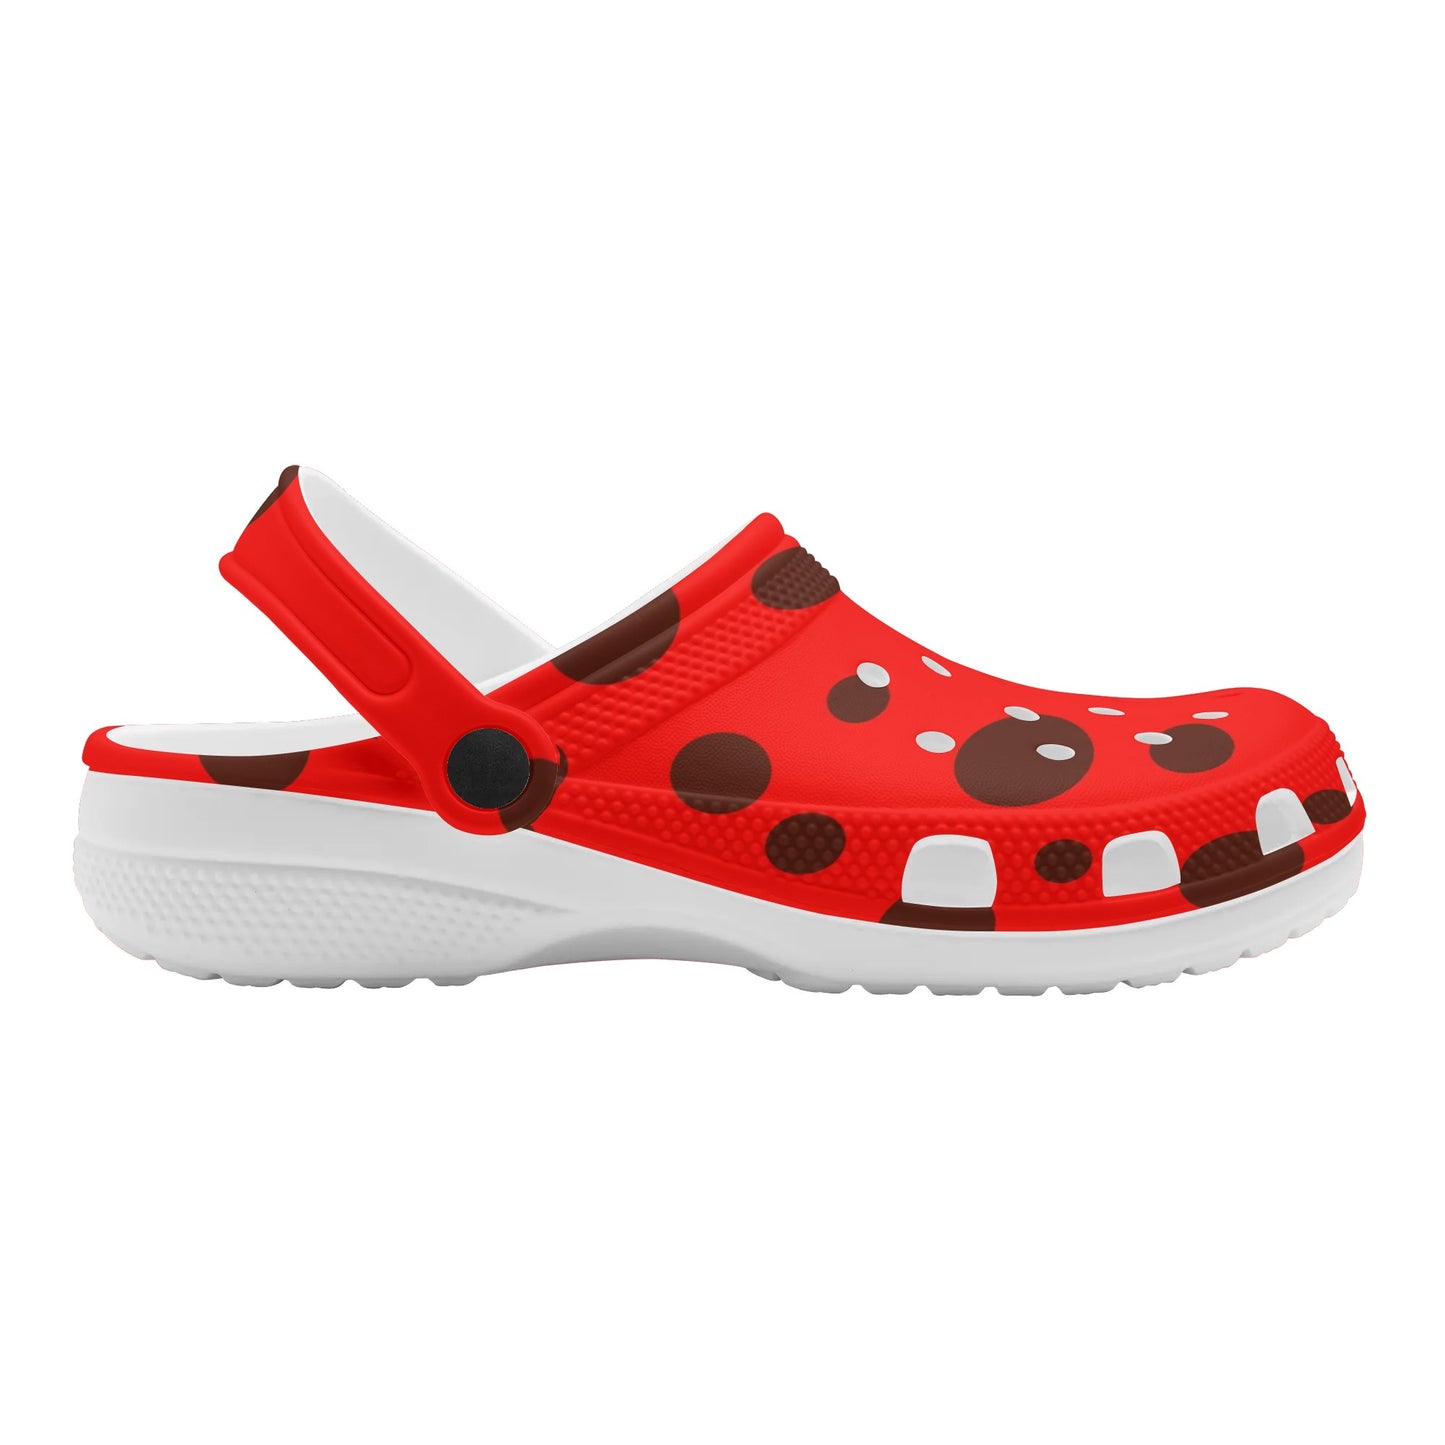 Lady Bugs Classic Sandals